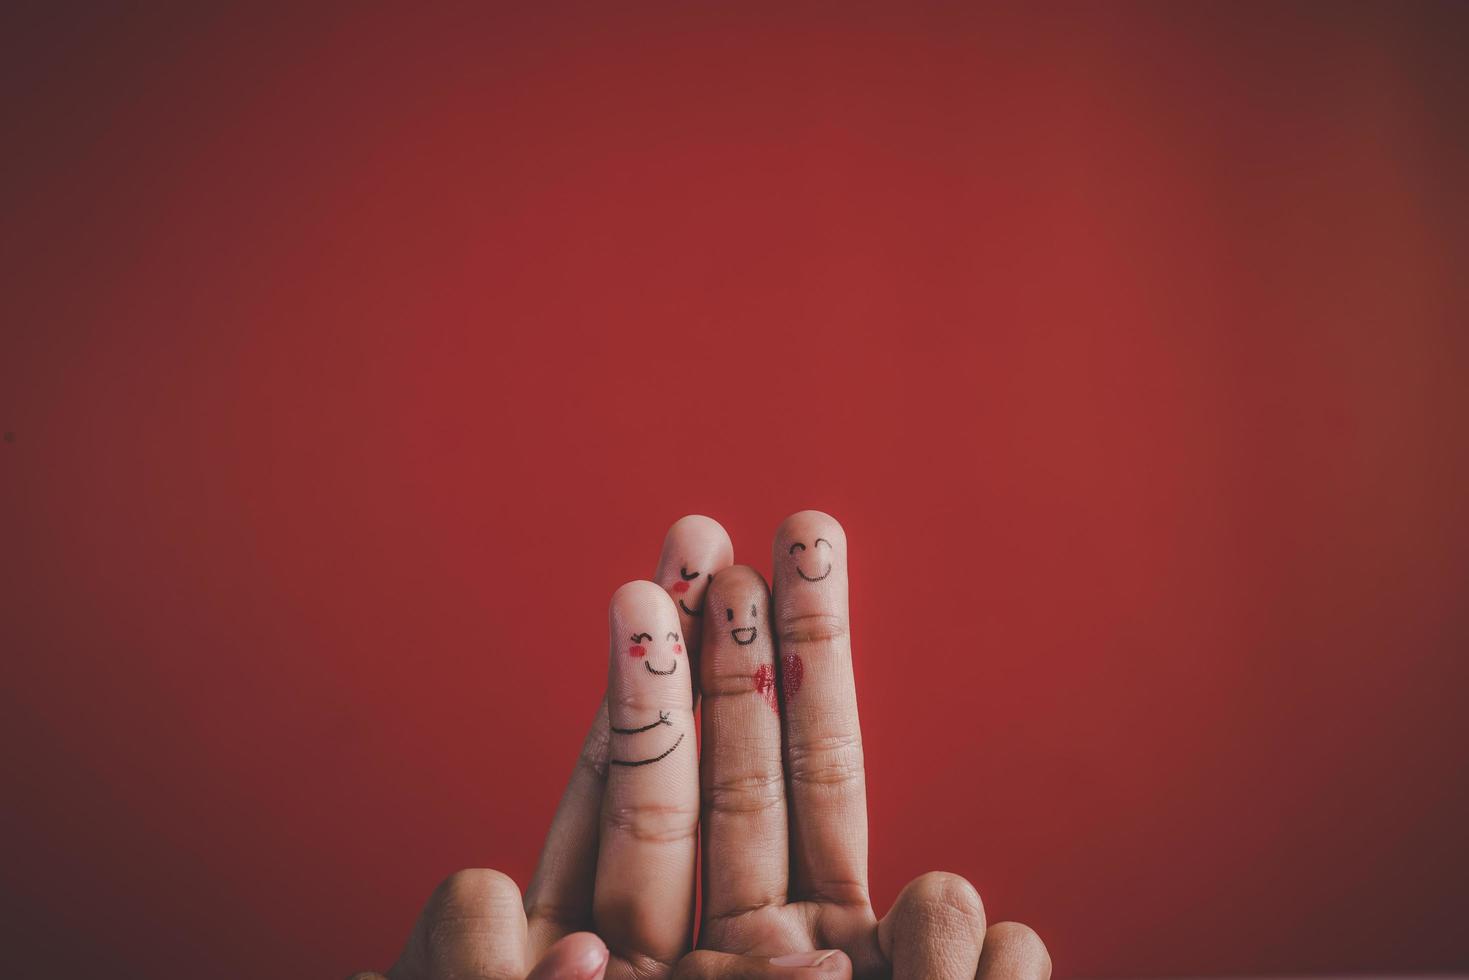 Finger with emotion on red background. photo